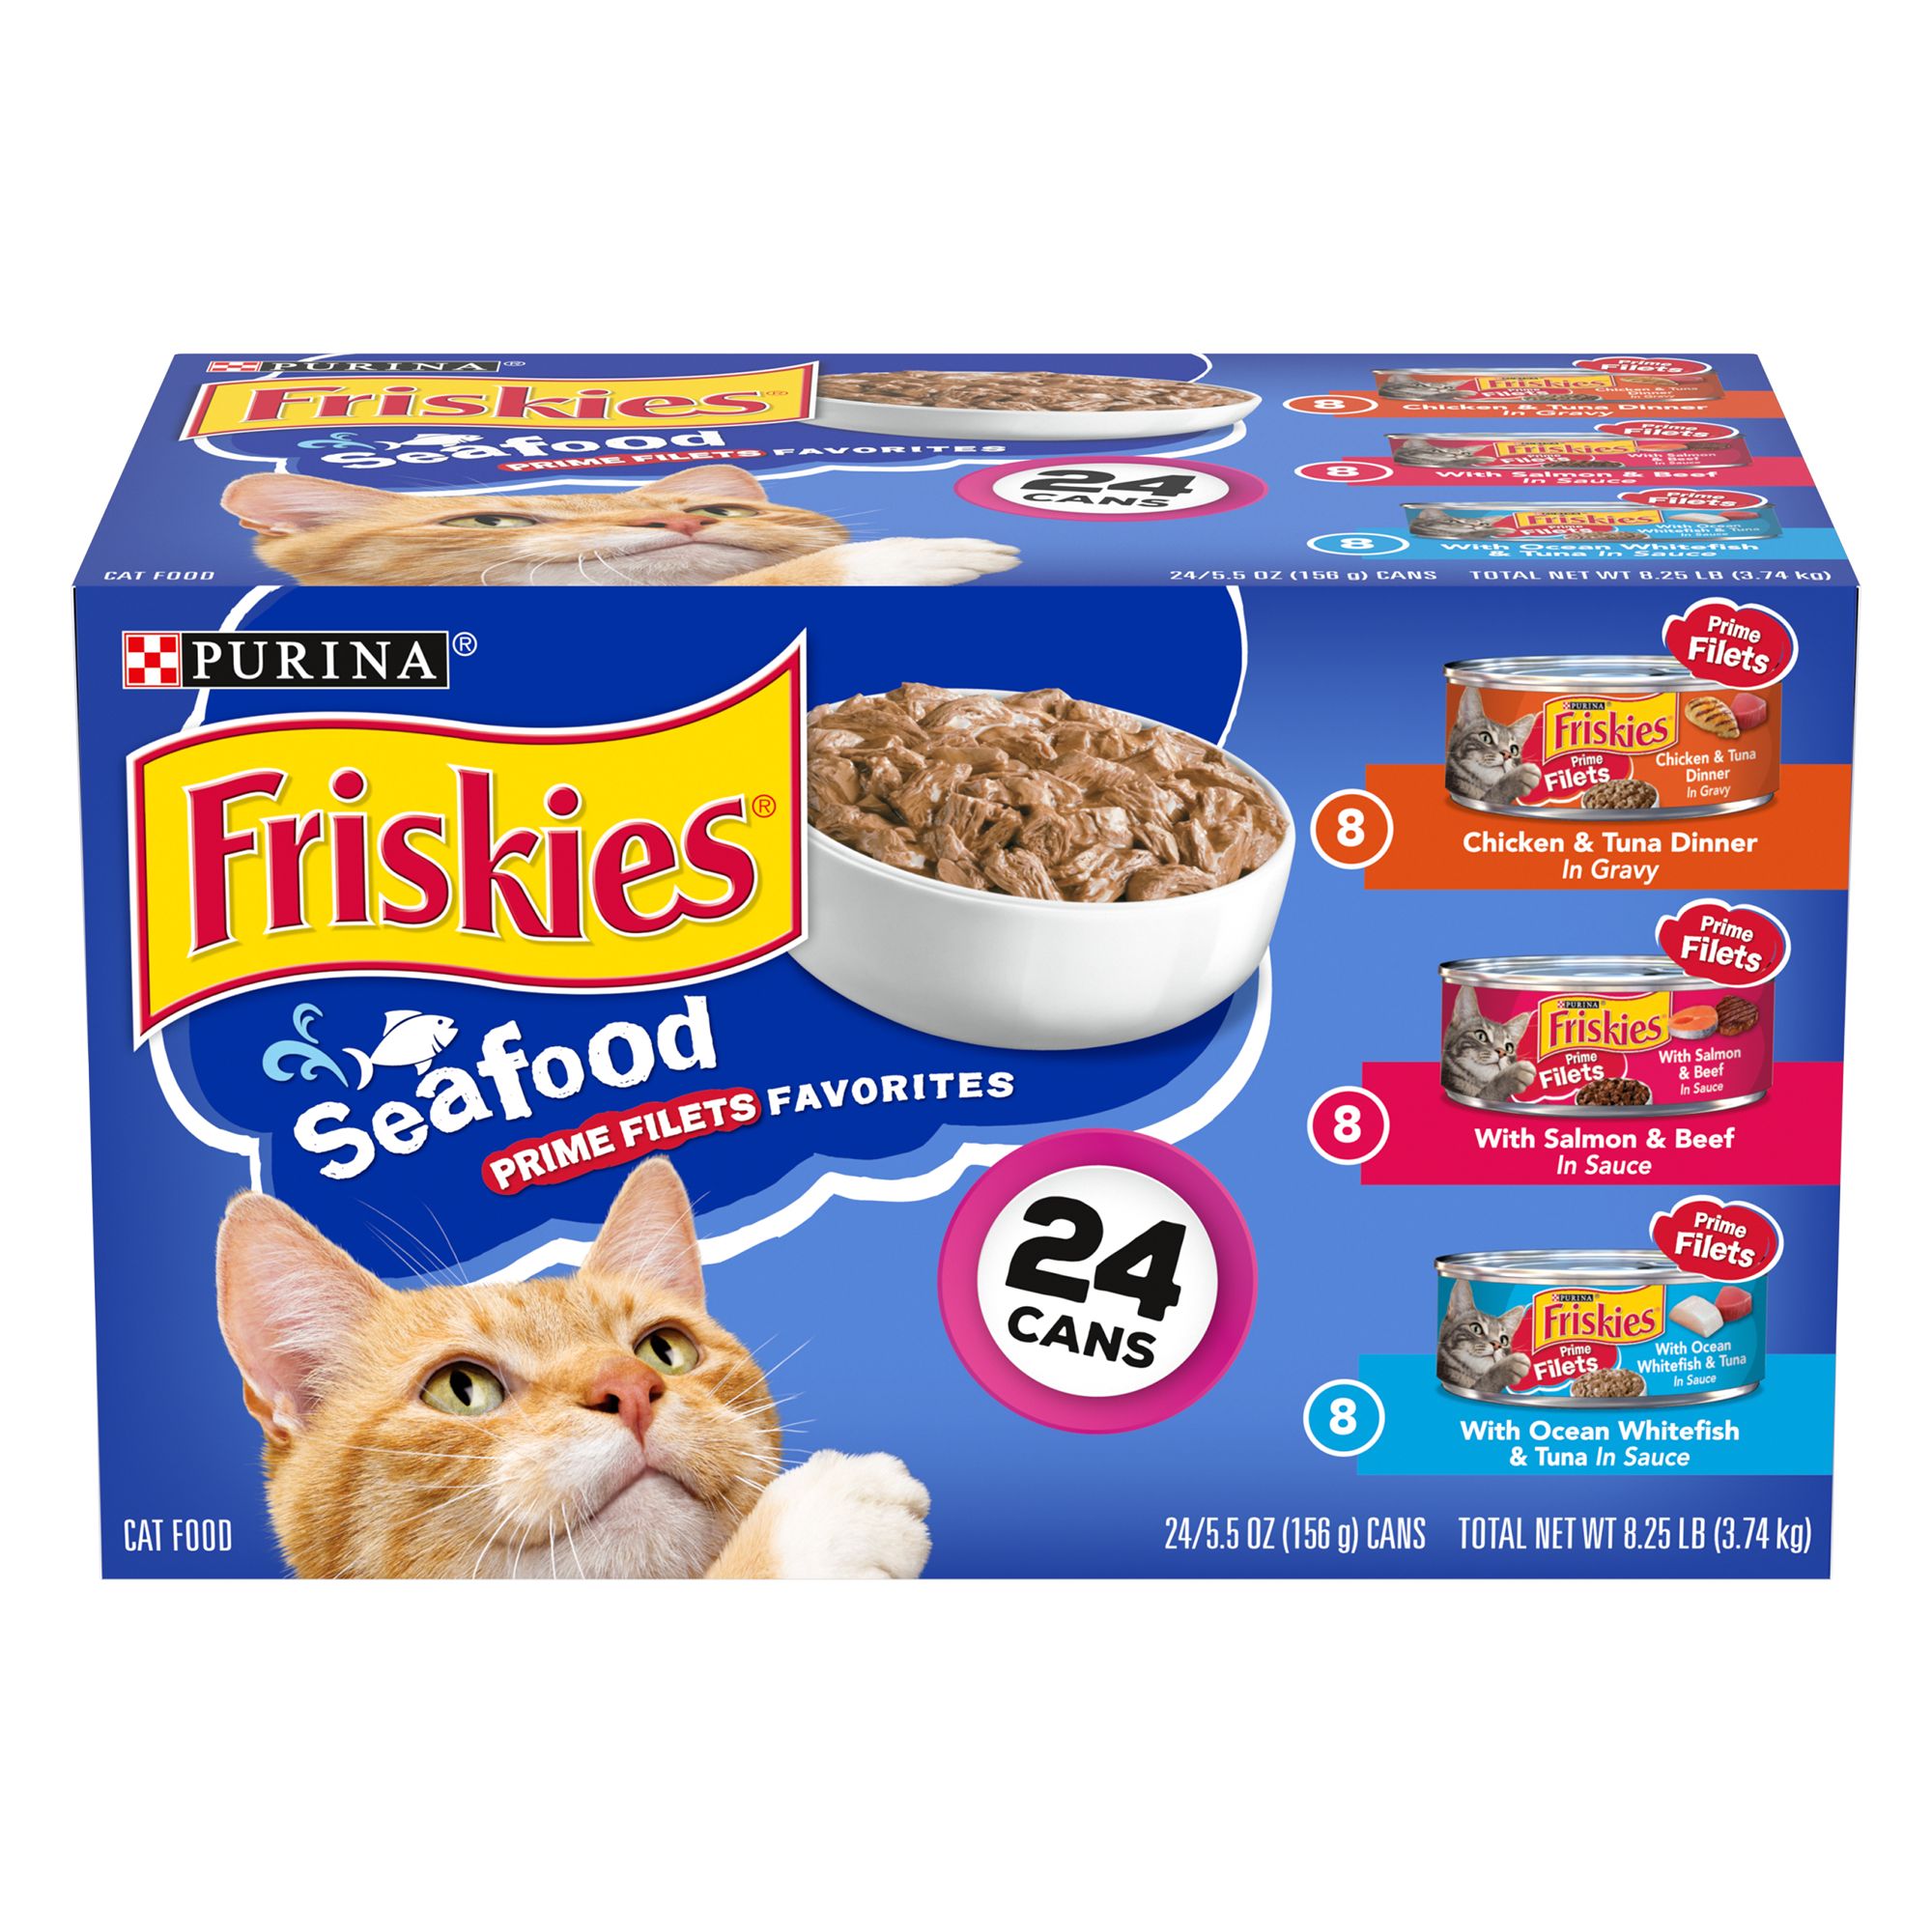 Purina® Friskies® Adult Cat Wet Food 9.4 lb., HighProtein, Real Meat